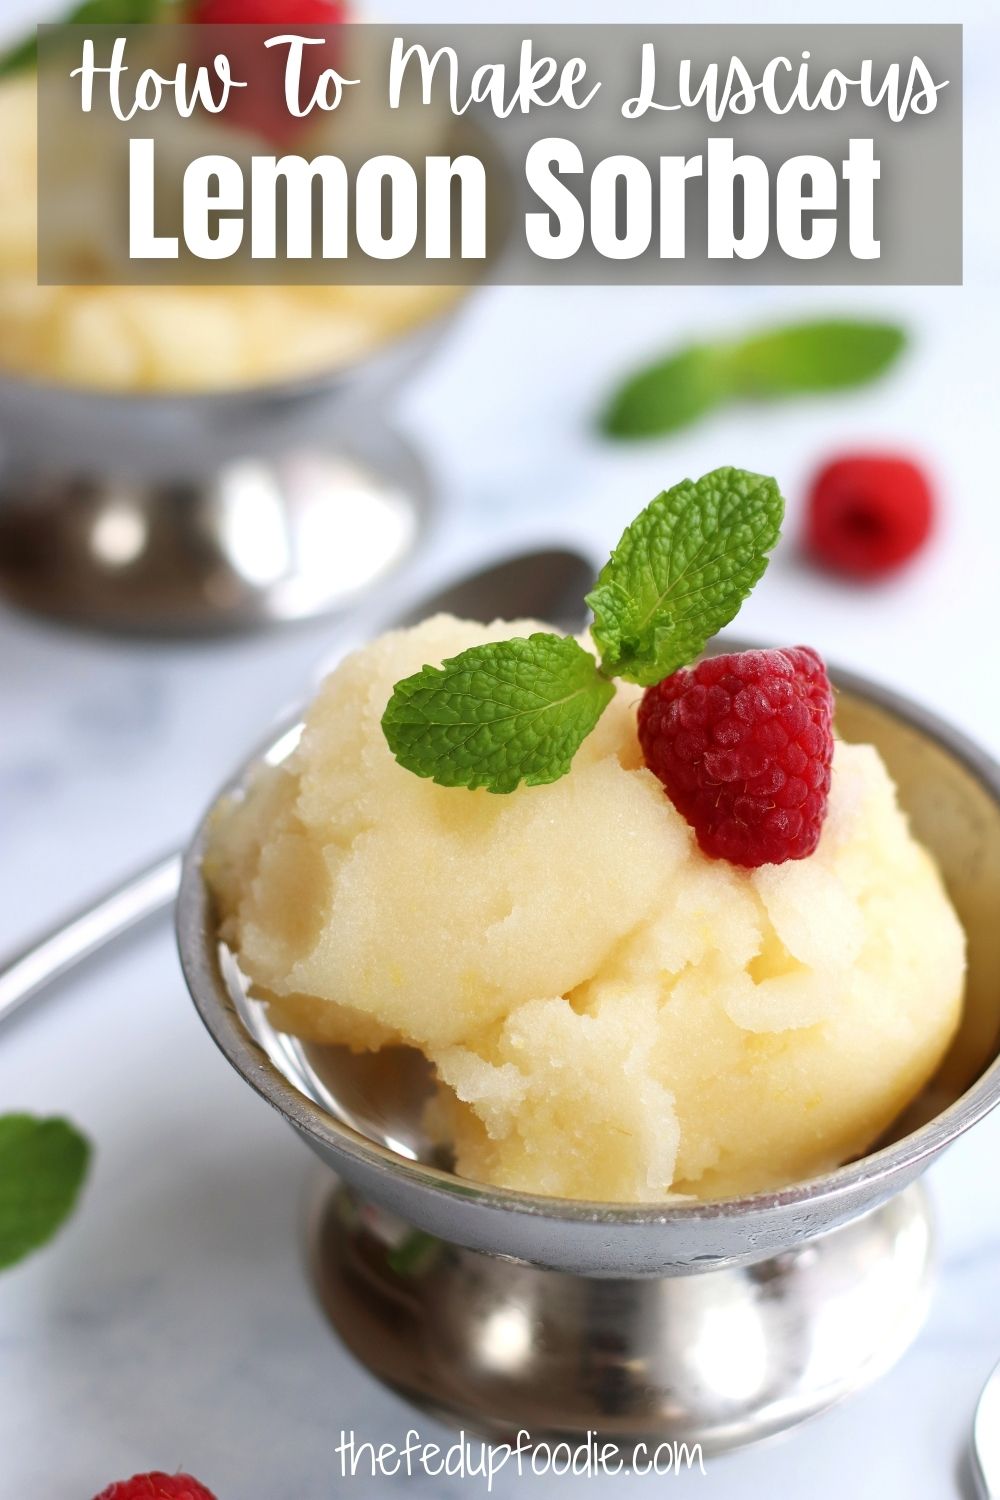 Homemade Lemon Sorbet is incredibly refreshing with a perfect balance of sweetness to tartness. Very easy to make with the use of an ice cream maker. This is a perfect summer dessert for lemon lovers
#LemonSorbet #EasySorbetRecipes #LemonSorbetRecipeIceCreamMaker #RecipesUsingLemons #LemonRecipesEasy #ThingsToDoWithLemons #FreshLemonsWhatToDoWith #LemonIdeas 